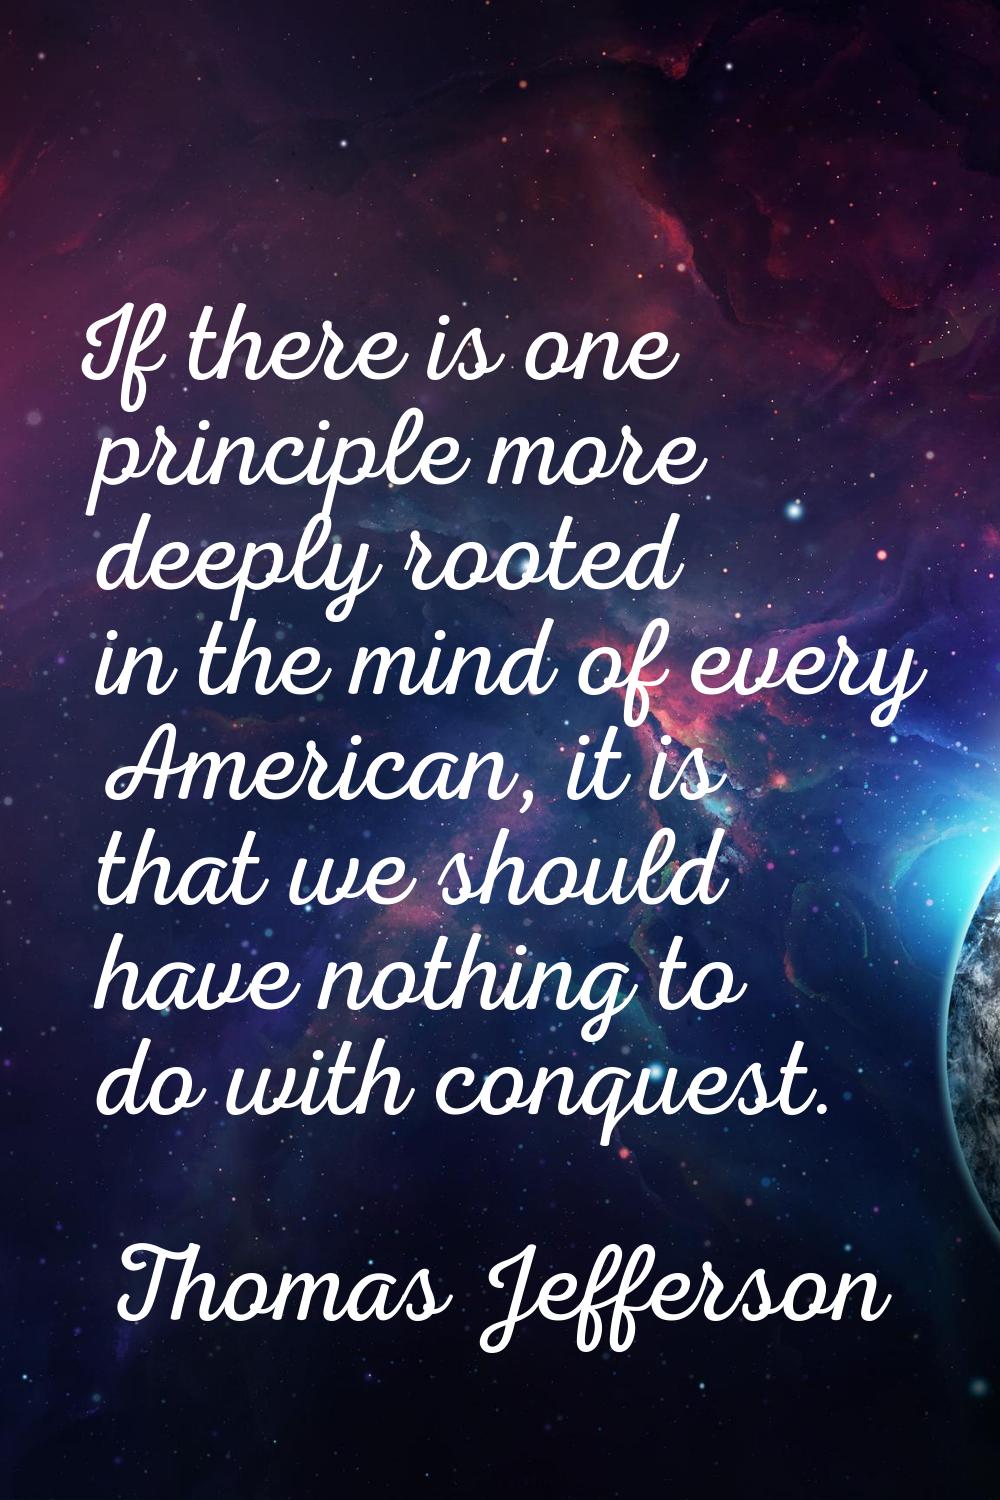 If there is one principle more deeply rooted in the mind of every American, it is that we should ha